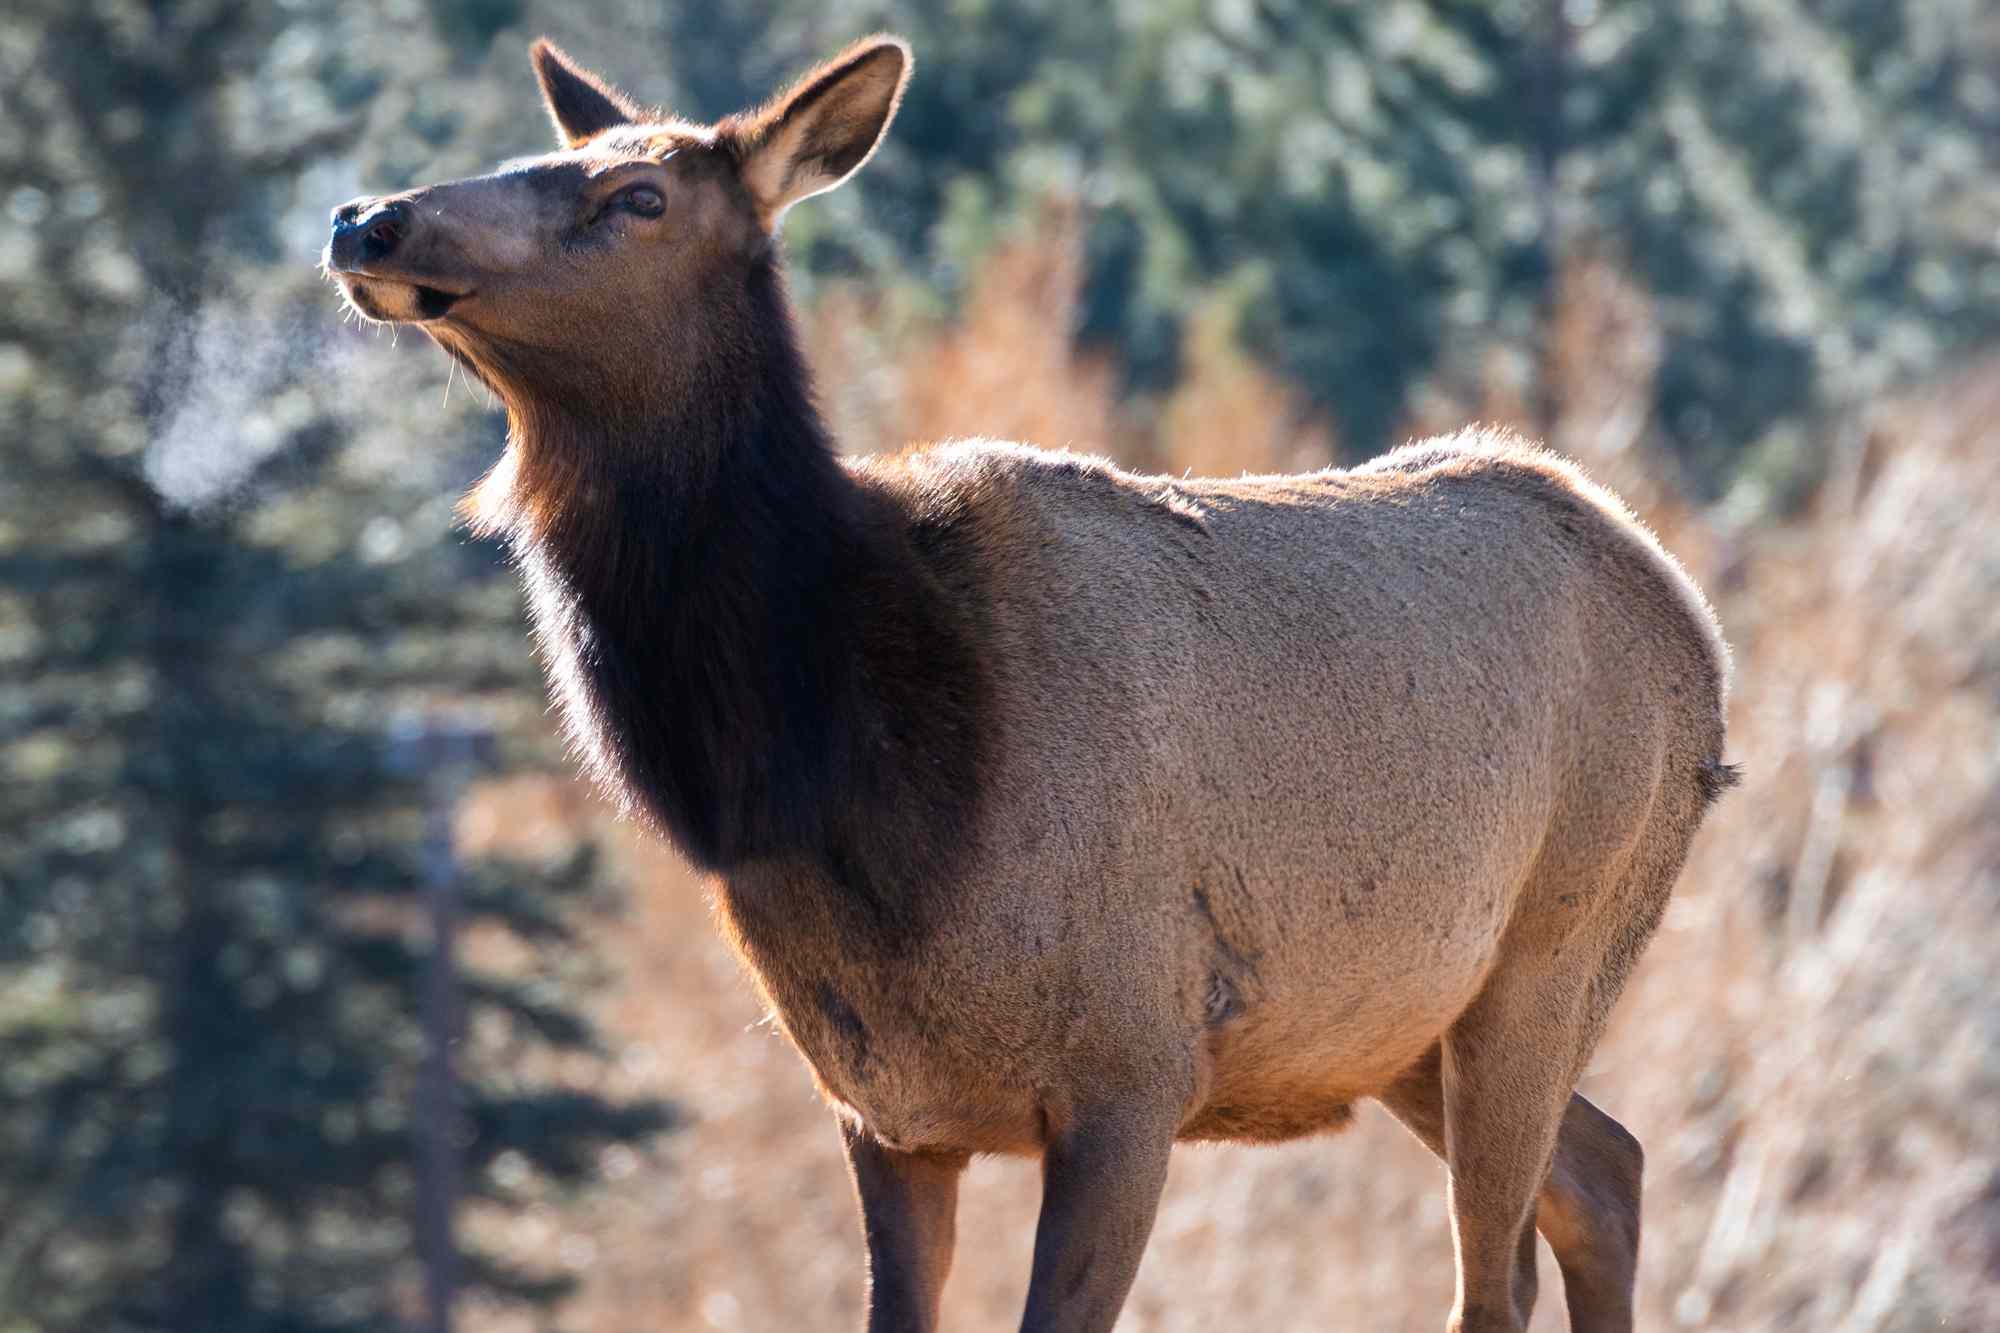 4-Year-Old Boy Attacked by Elk at Colorado Playground Days After Girl Injured in Similar Incident